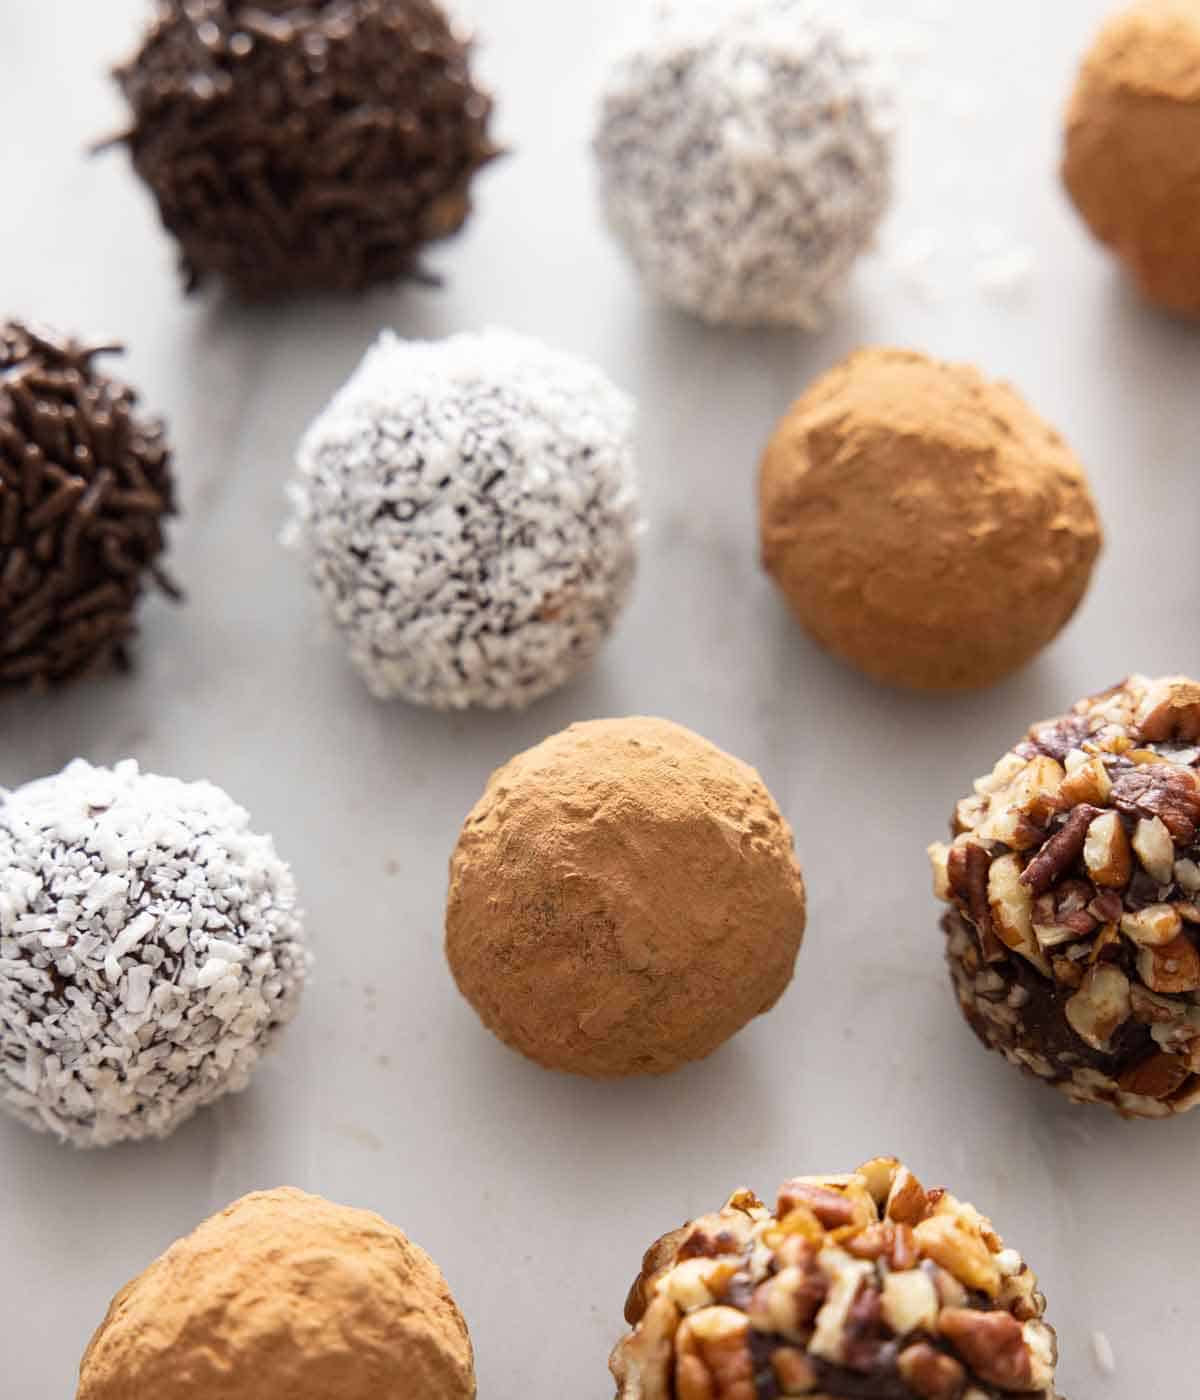 Rows of chocolate truffles with different coatings on them.